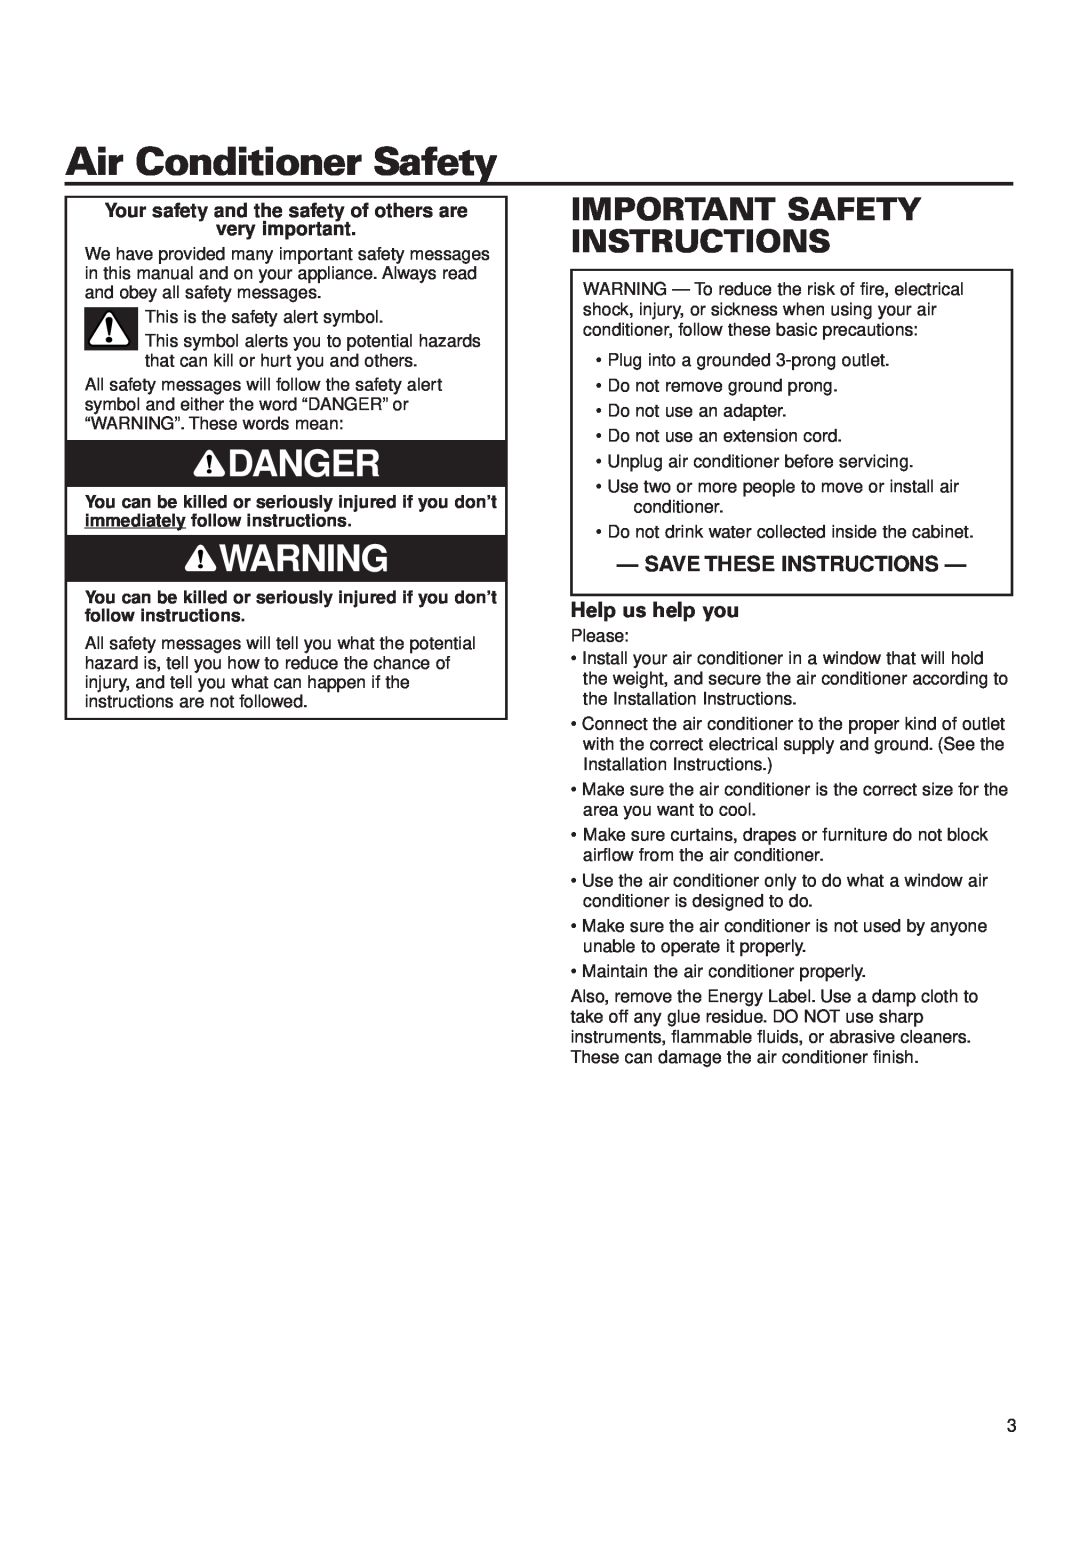 Whirlpool RA51K0 Air Conditioner Safety, Danger, Important Safety Instructions, Save These Instructions, Help us help you 